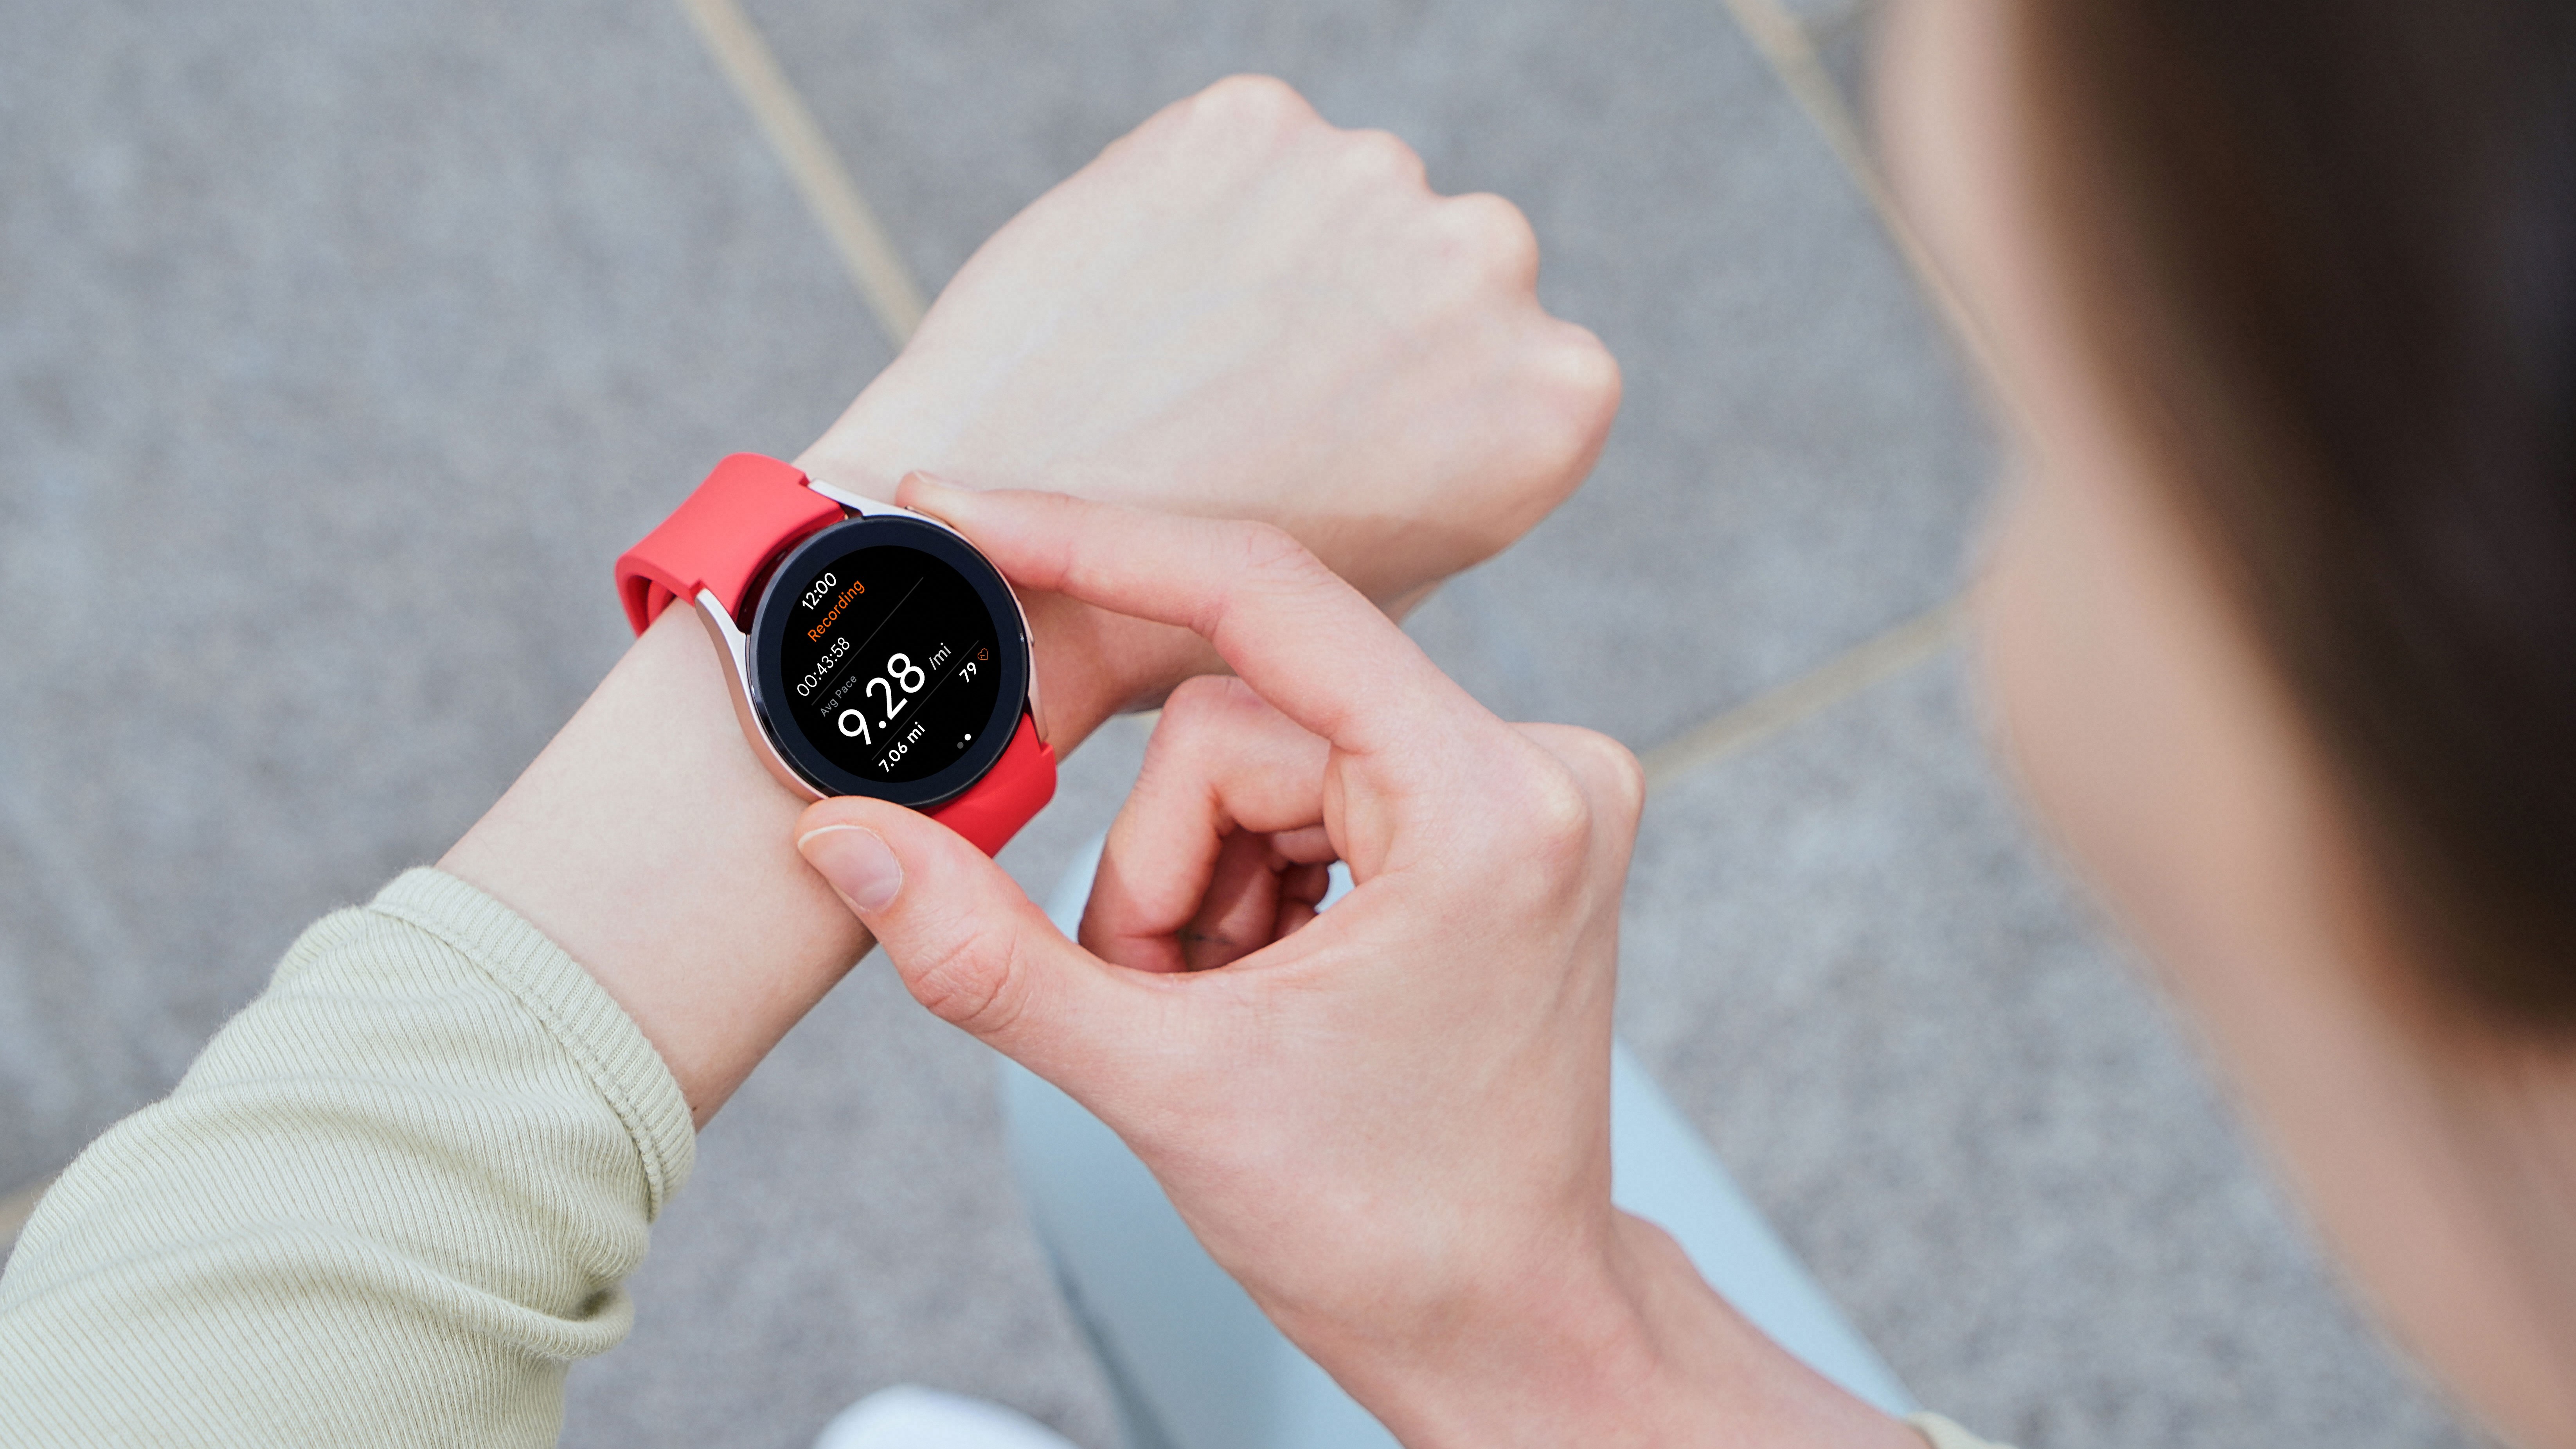 Hands-on Honor Watch 4 review: smartwatch style, fitness tracker